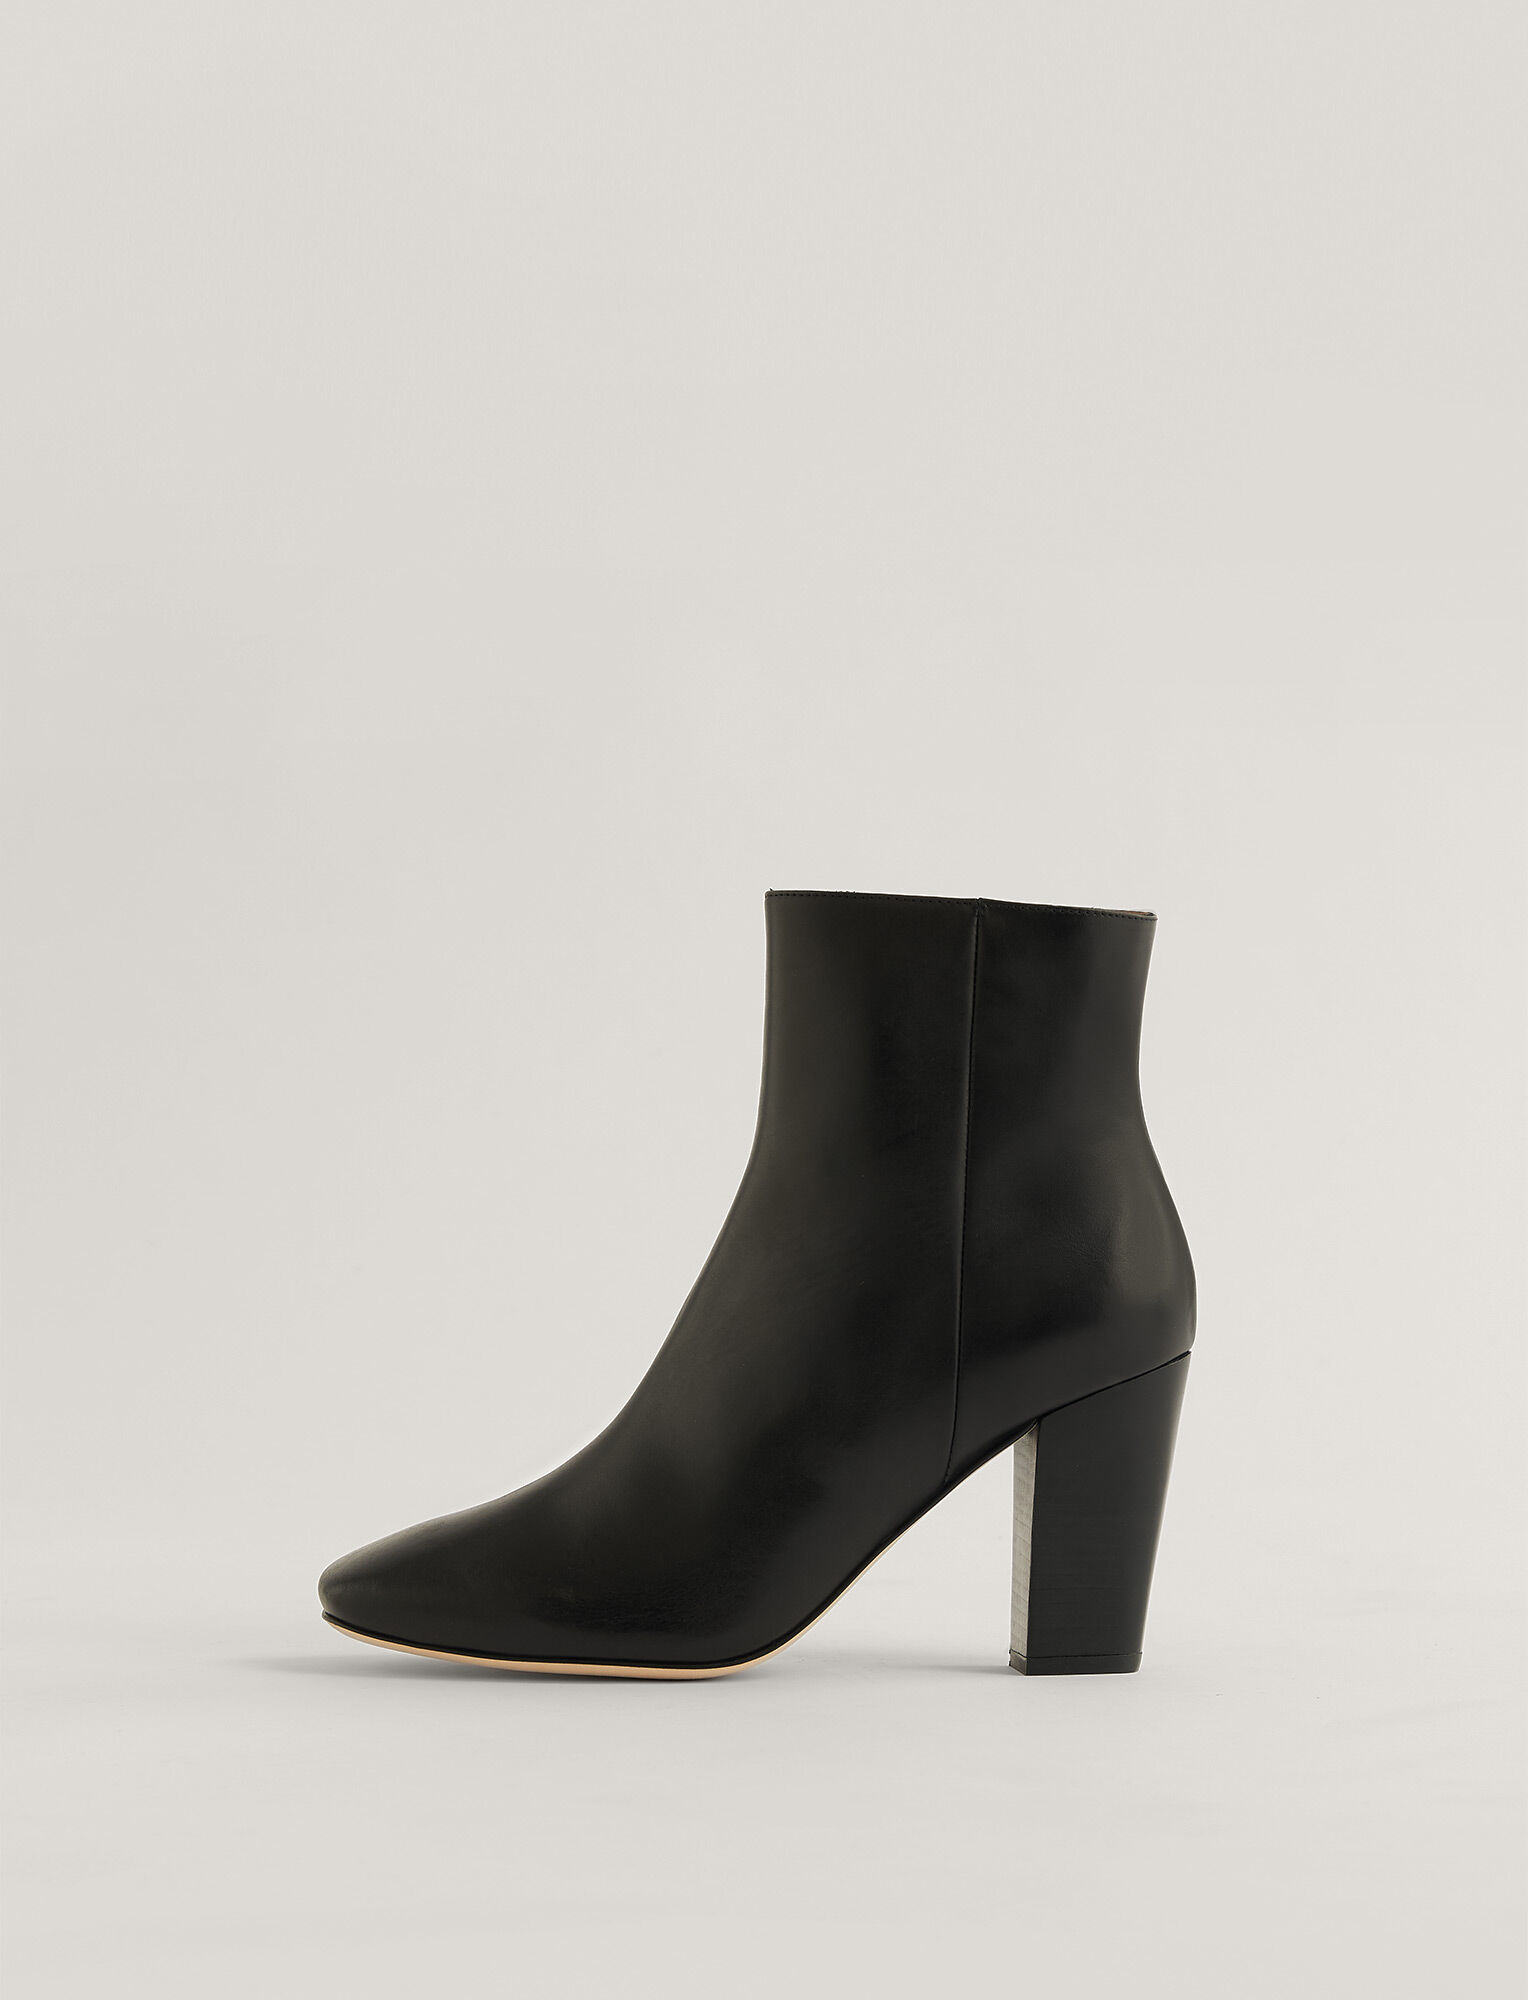 Shining Udveksle Countryside Square Heel Ankle Boots in Black | JOSEPH